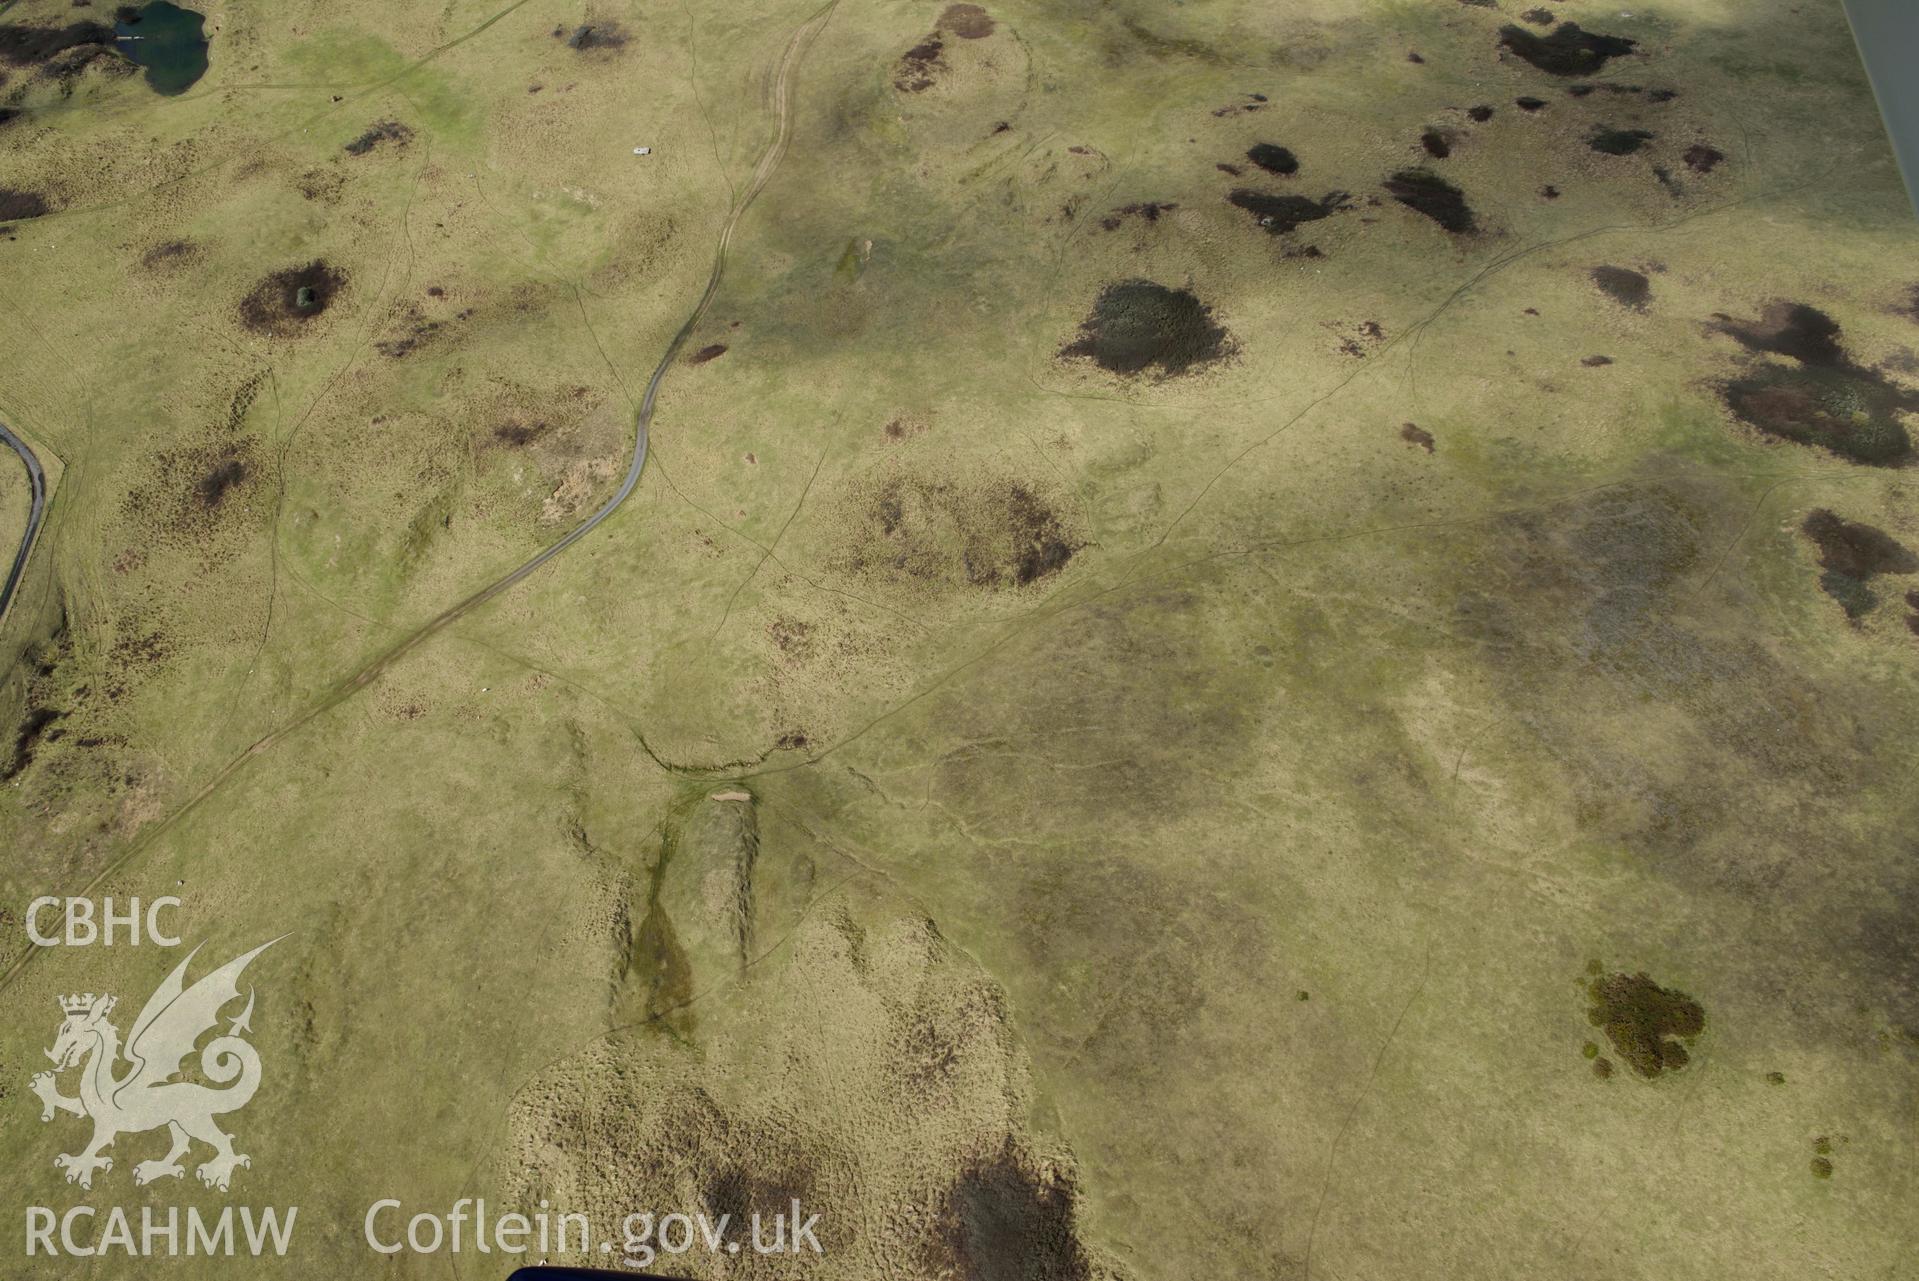 Frainslake Sands peat deposits, general landscape view.Baseline aerial reconnaissance survey for the CHERISH Project. ? Crown: CHERISH PROJECT 2018. Produced with EU funds through the Ireland Wales Co-operation Programme 2014-2020. All material made freely available through the Open Government Licence.